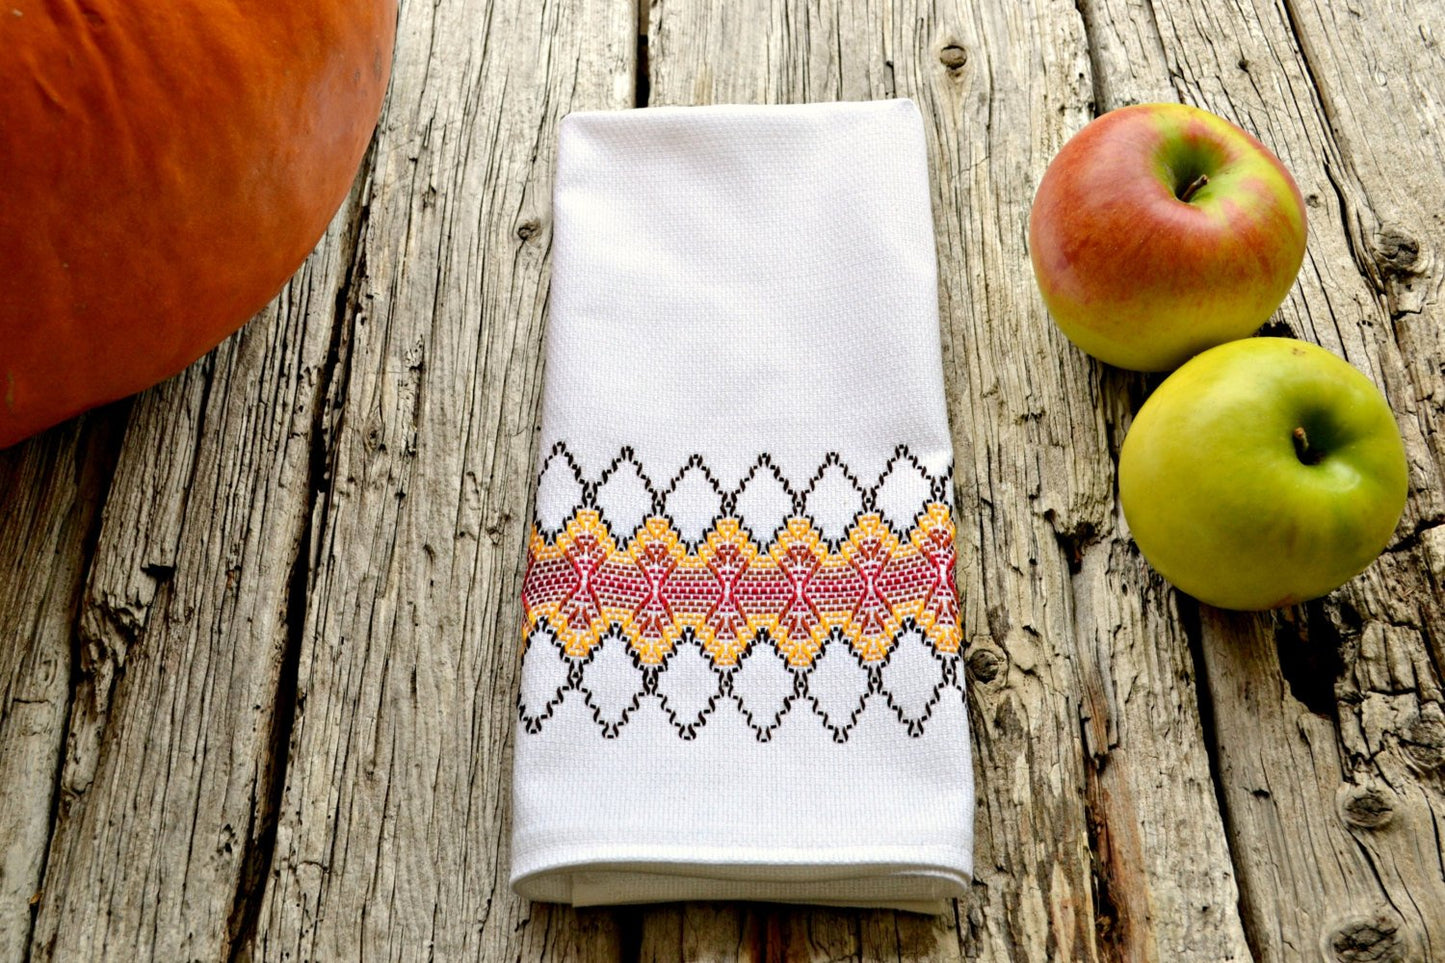 Huck teatowel stitched in fall colors with apples and pumpkin